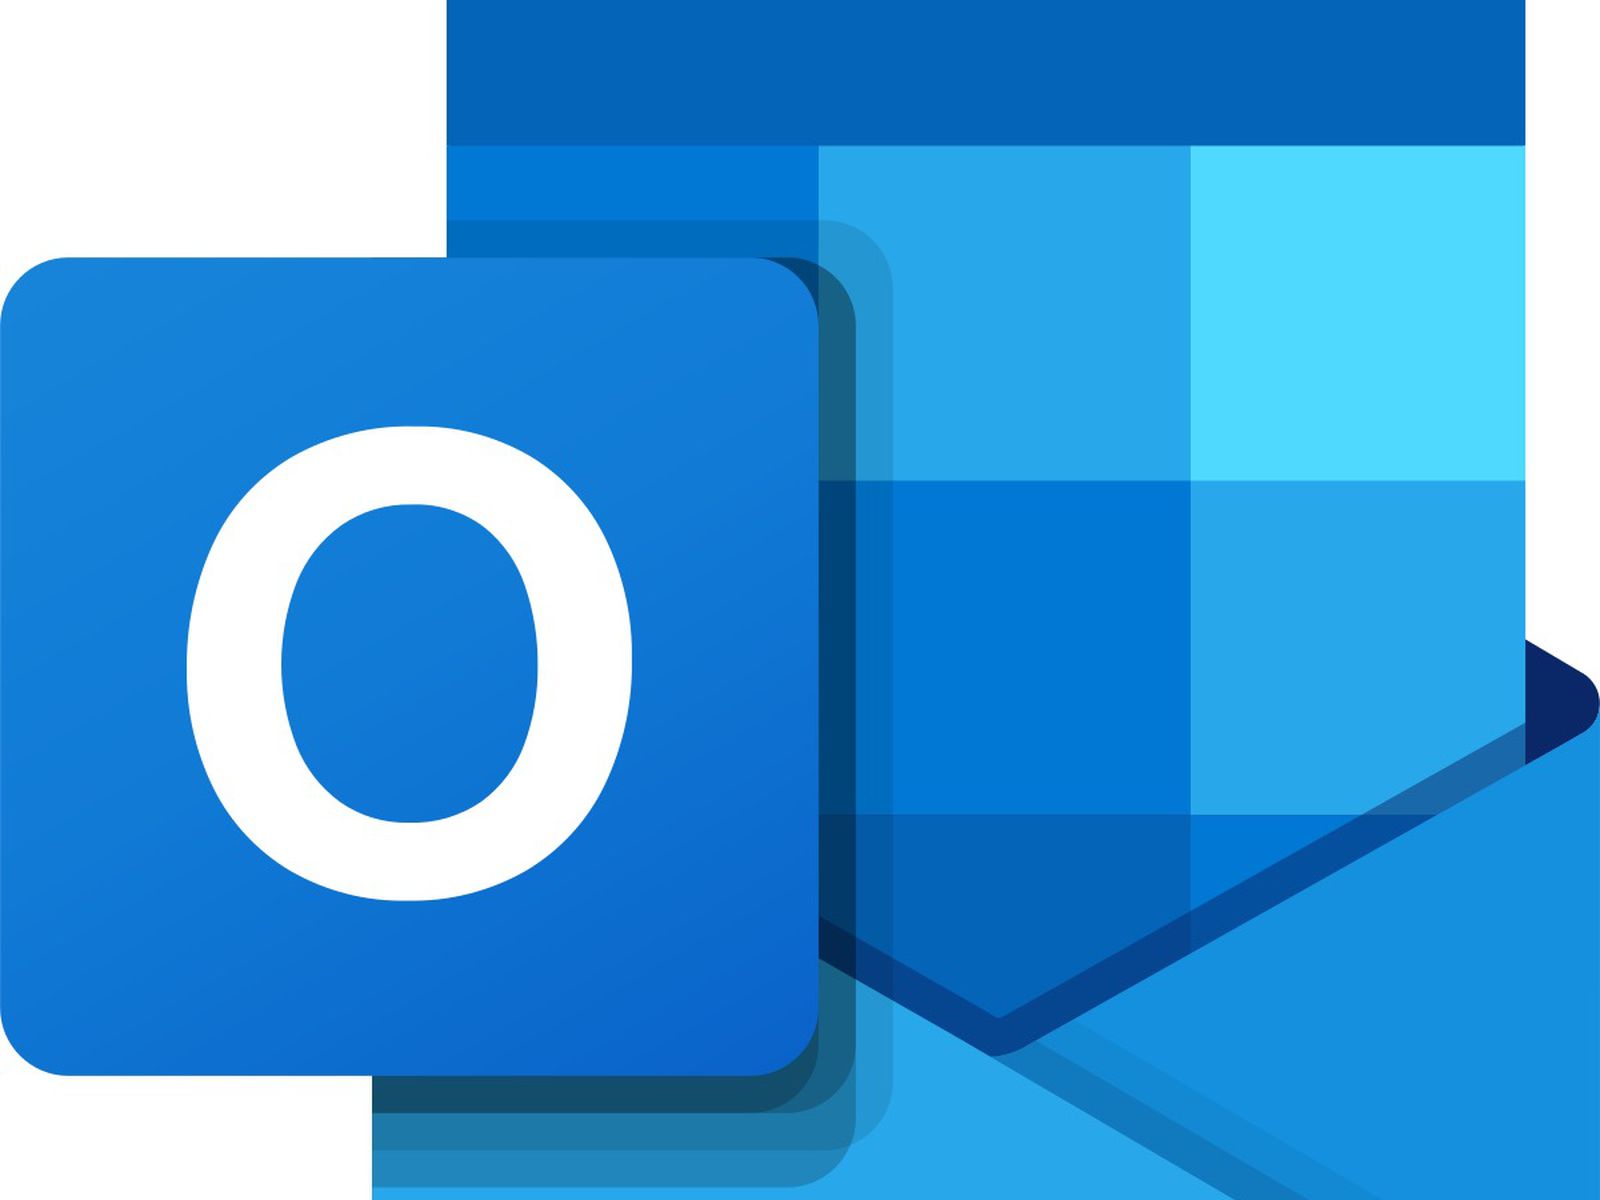 outlook mail app for mac